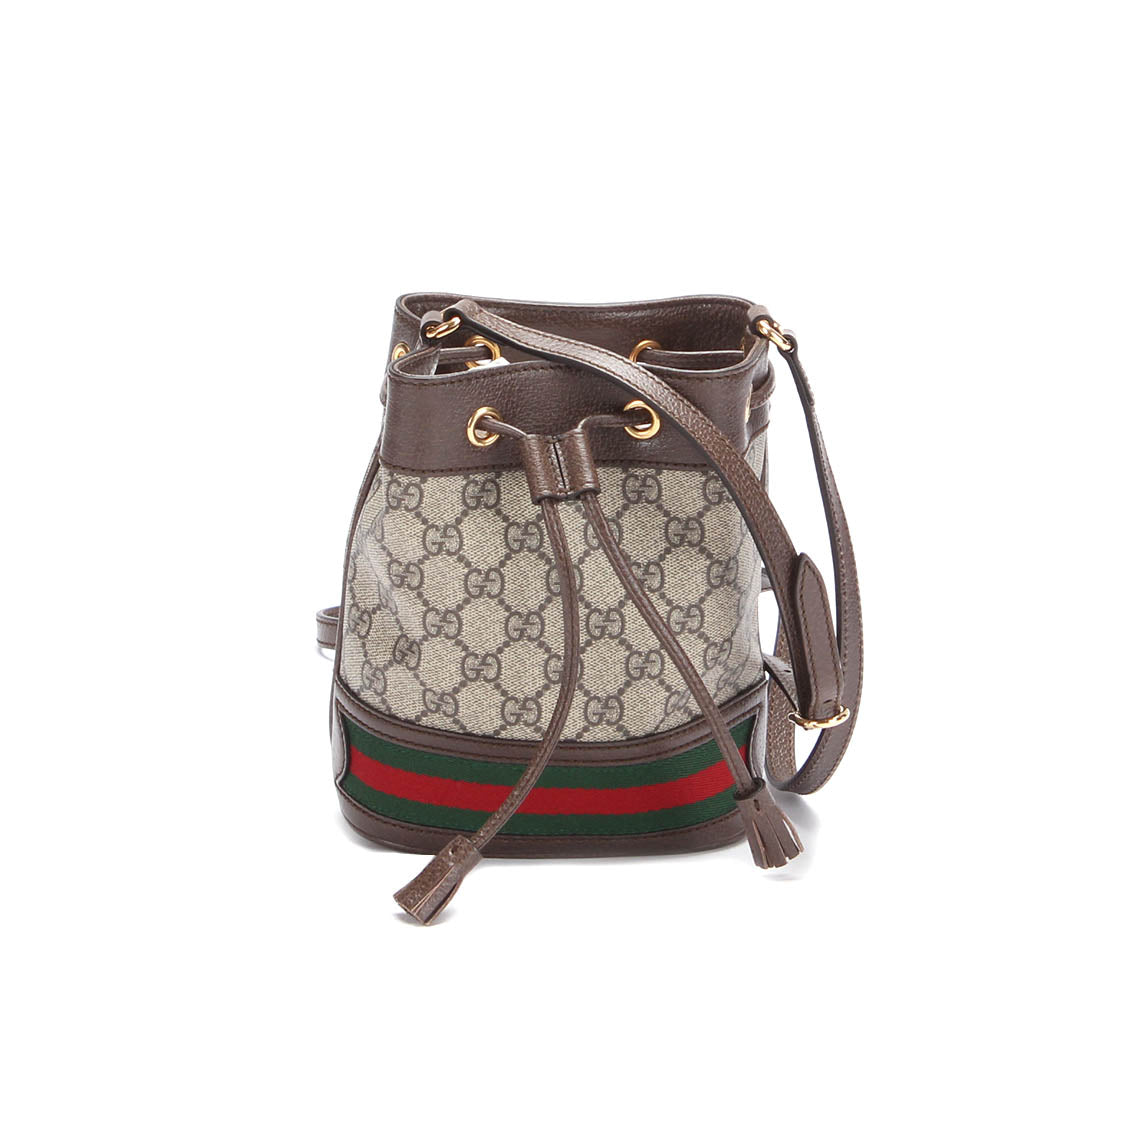 Gucci Mini GG Supreme Ophidia Bucket Bag Canvas Crossbody Bag 550620 in Excellent condition